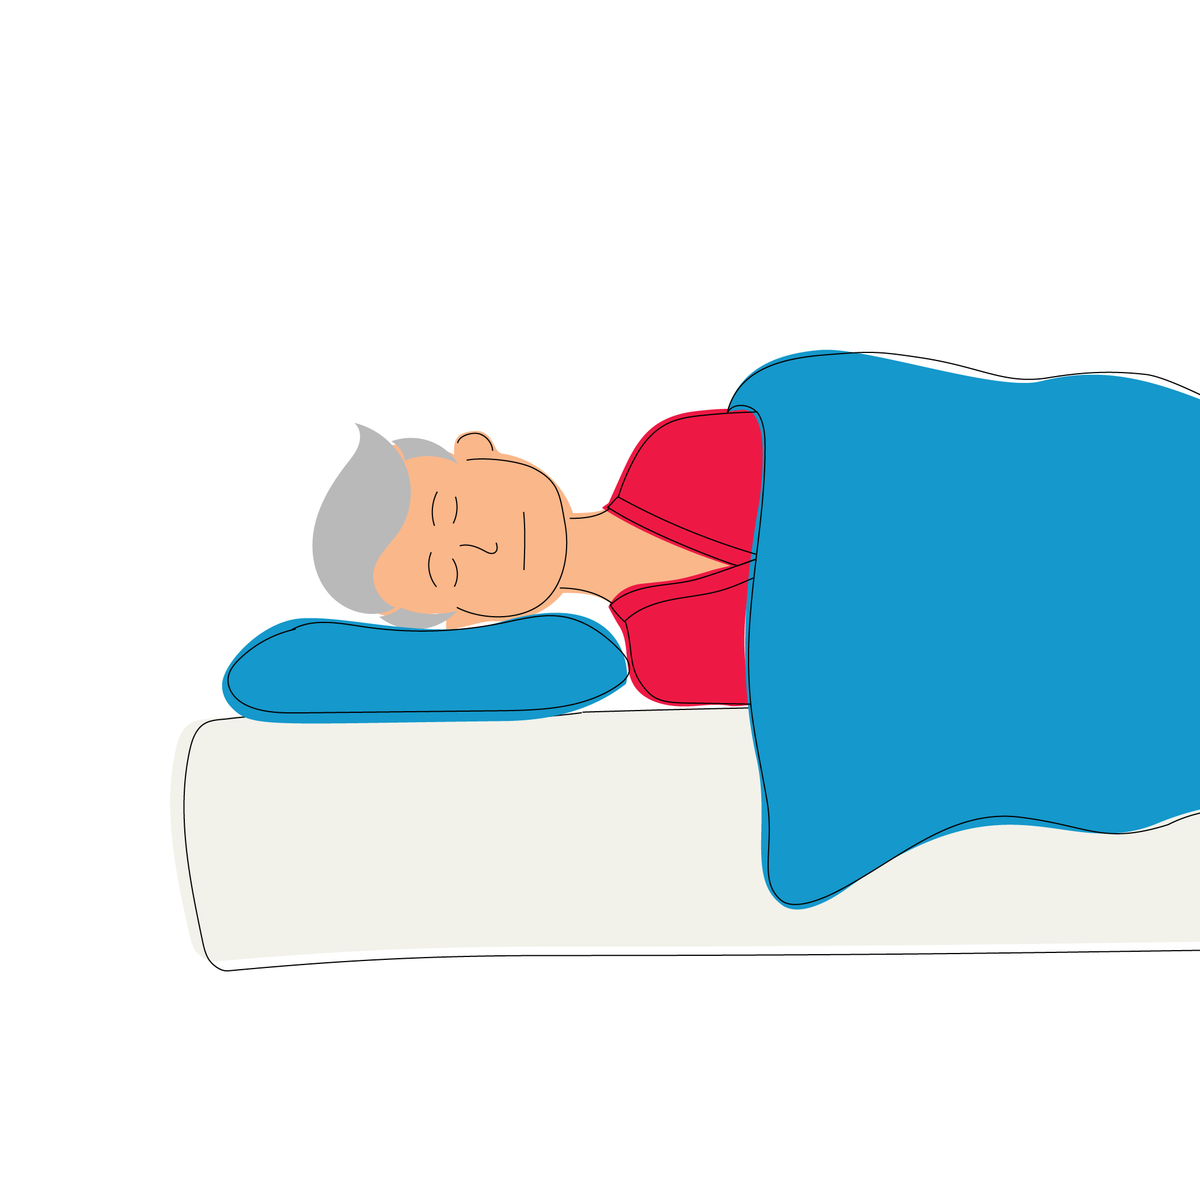 A graphic of a man sleeping on his side